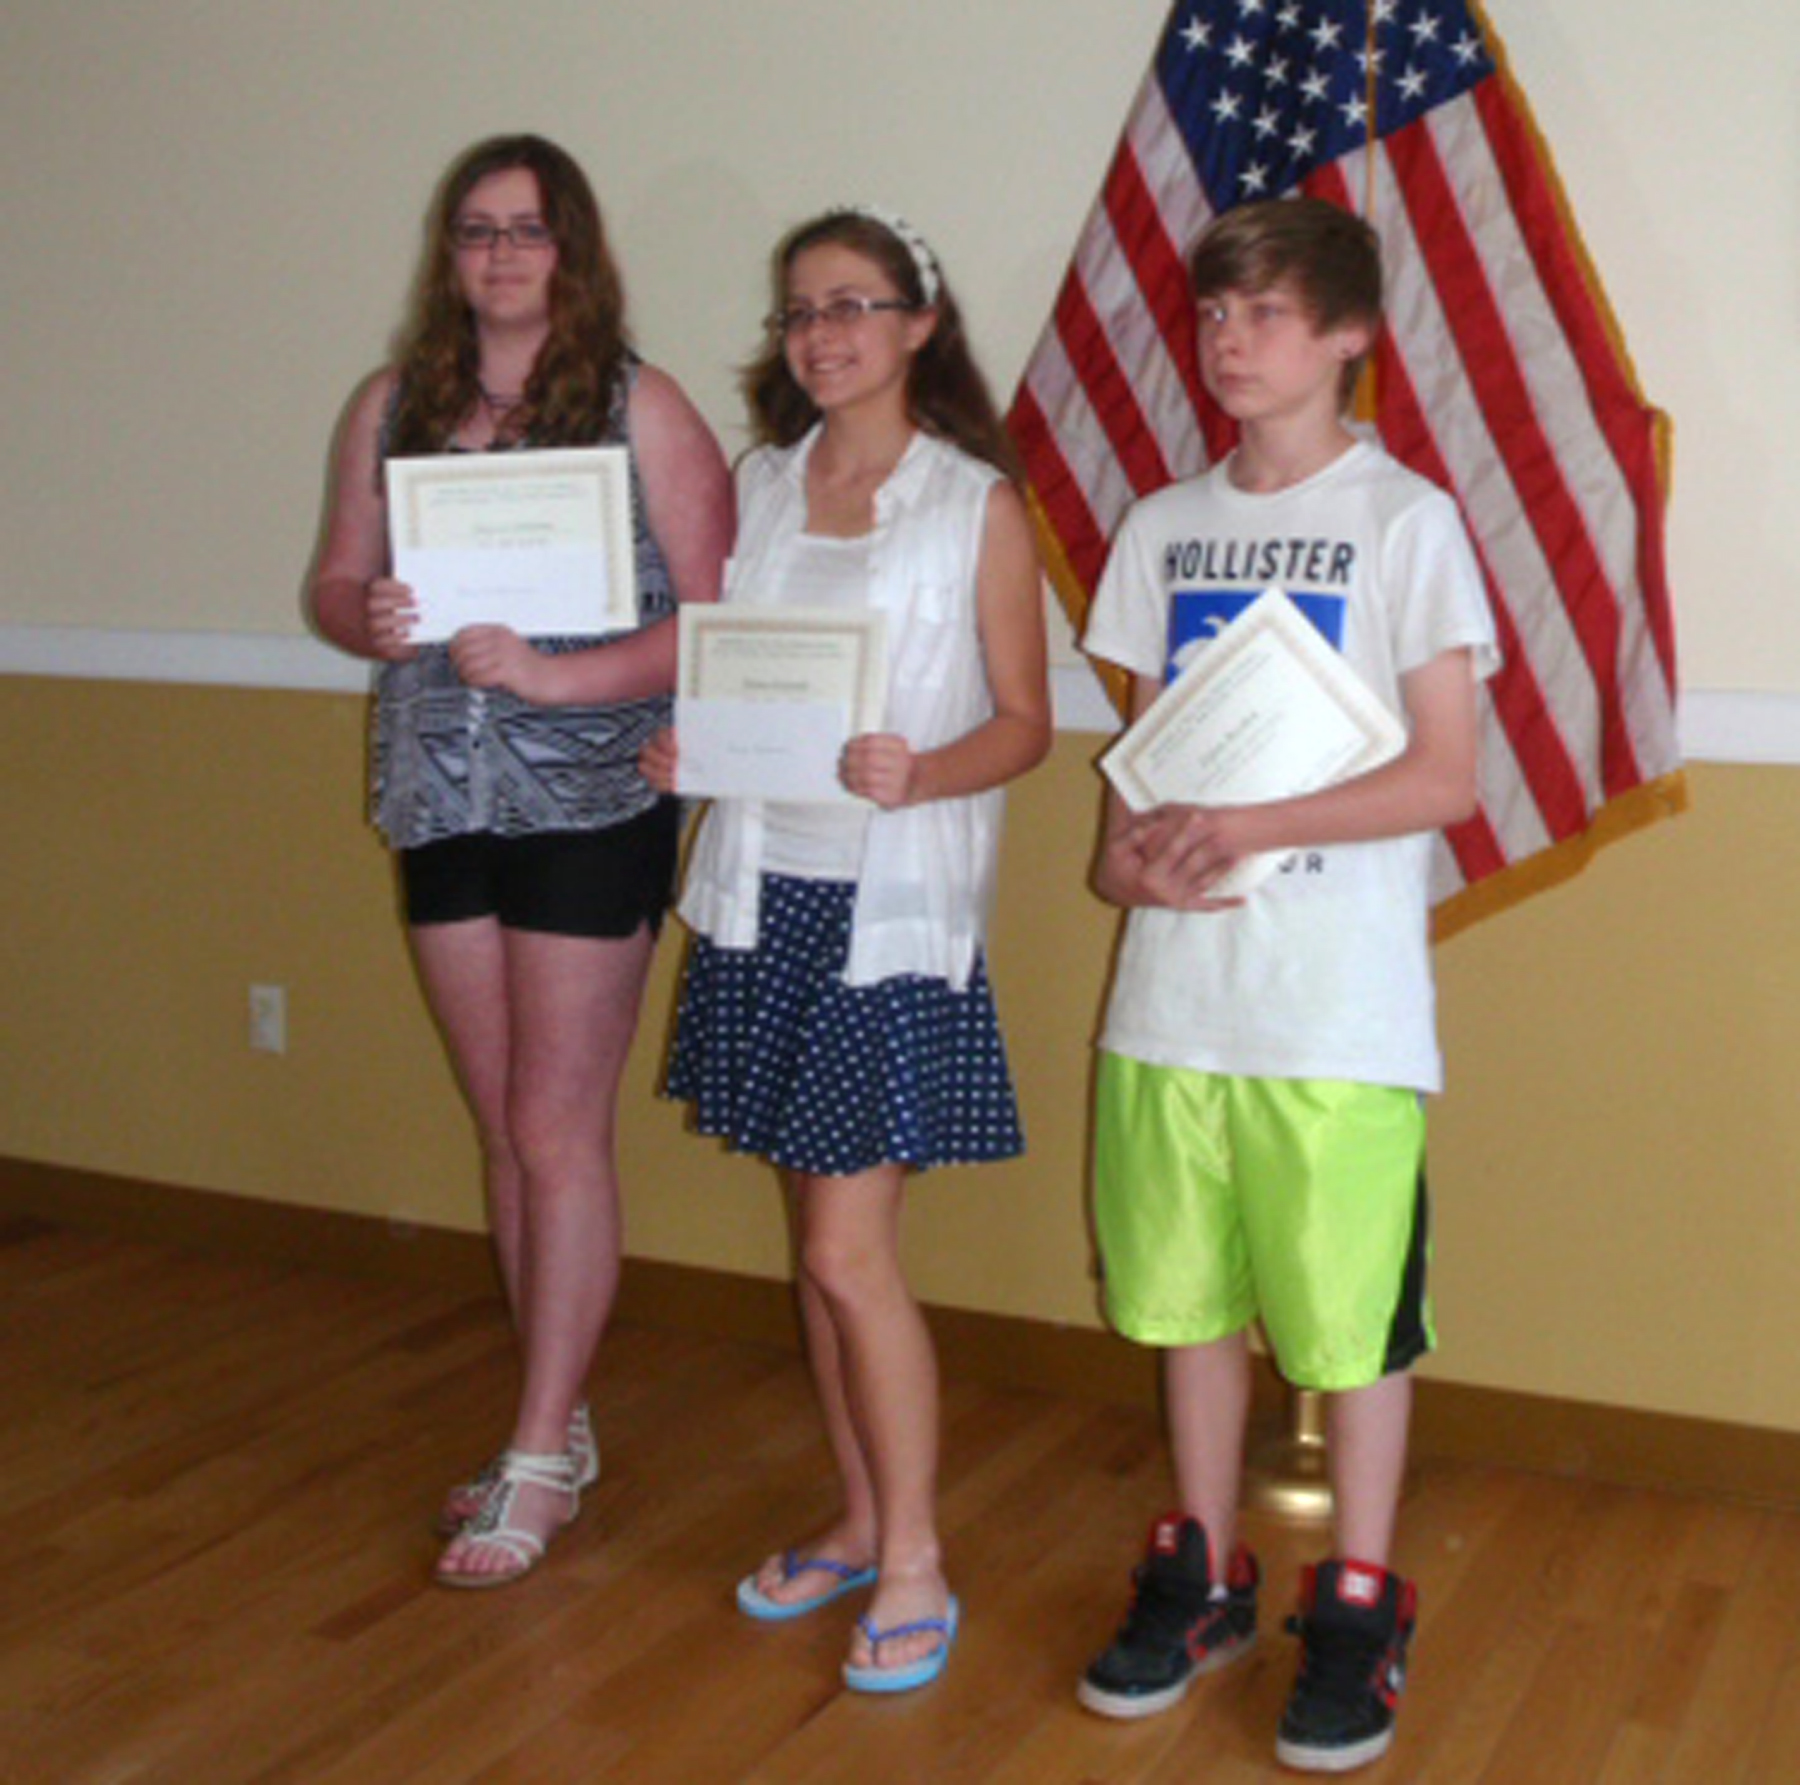 Essay contests for middle school students 2014